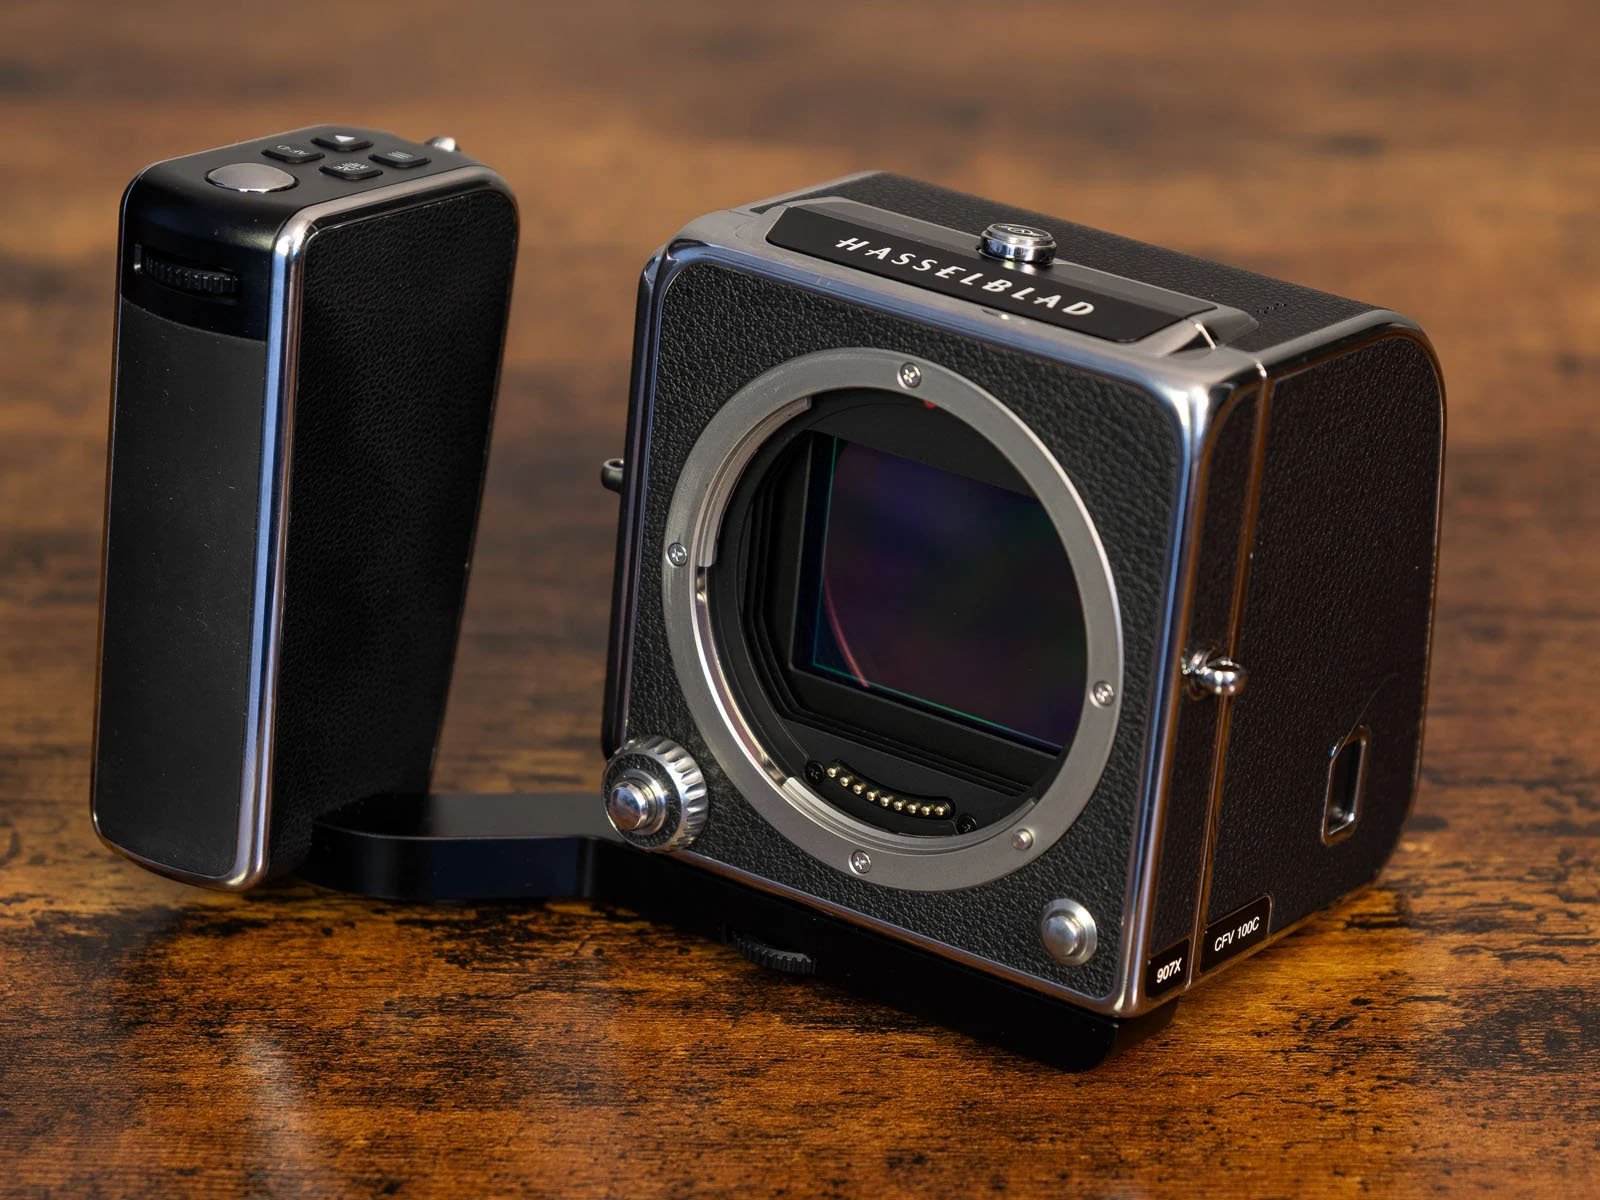 A hasselblad medium format camera body with a digital back on a wooden surface, showing a detailed view of the camera's lens mount and sensor.